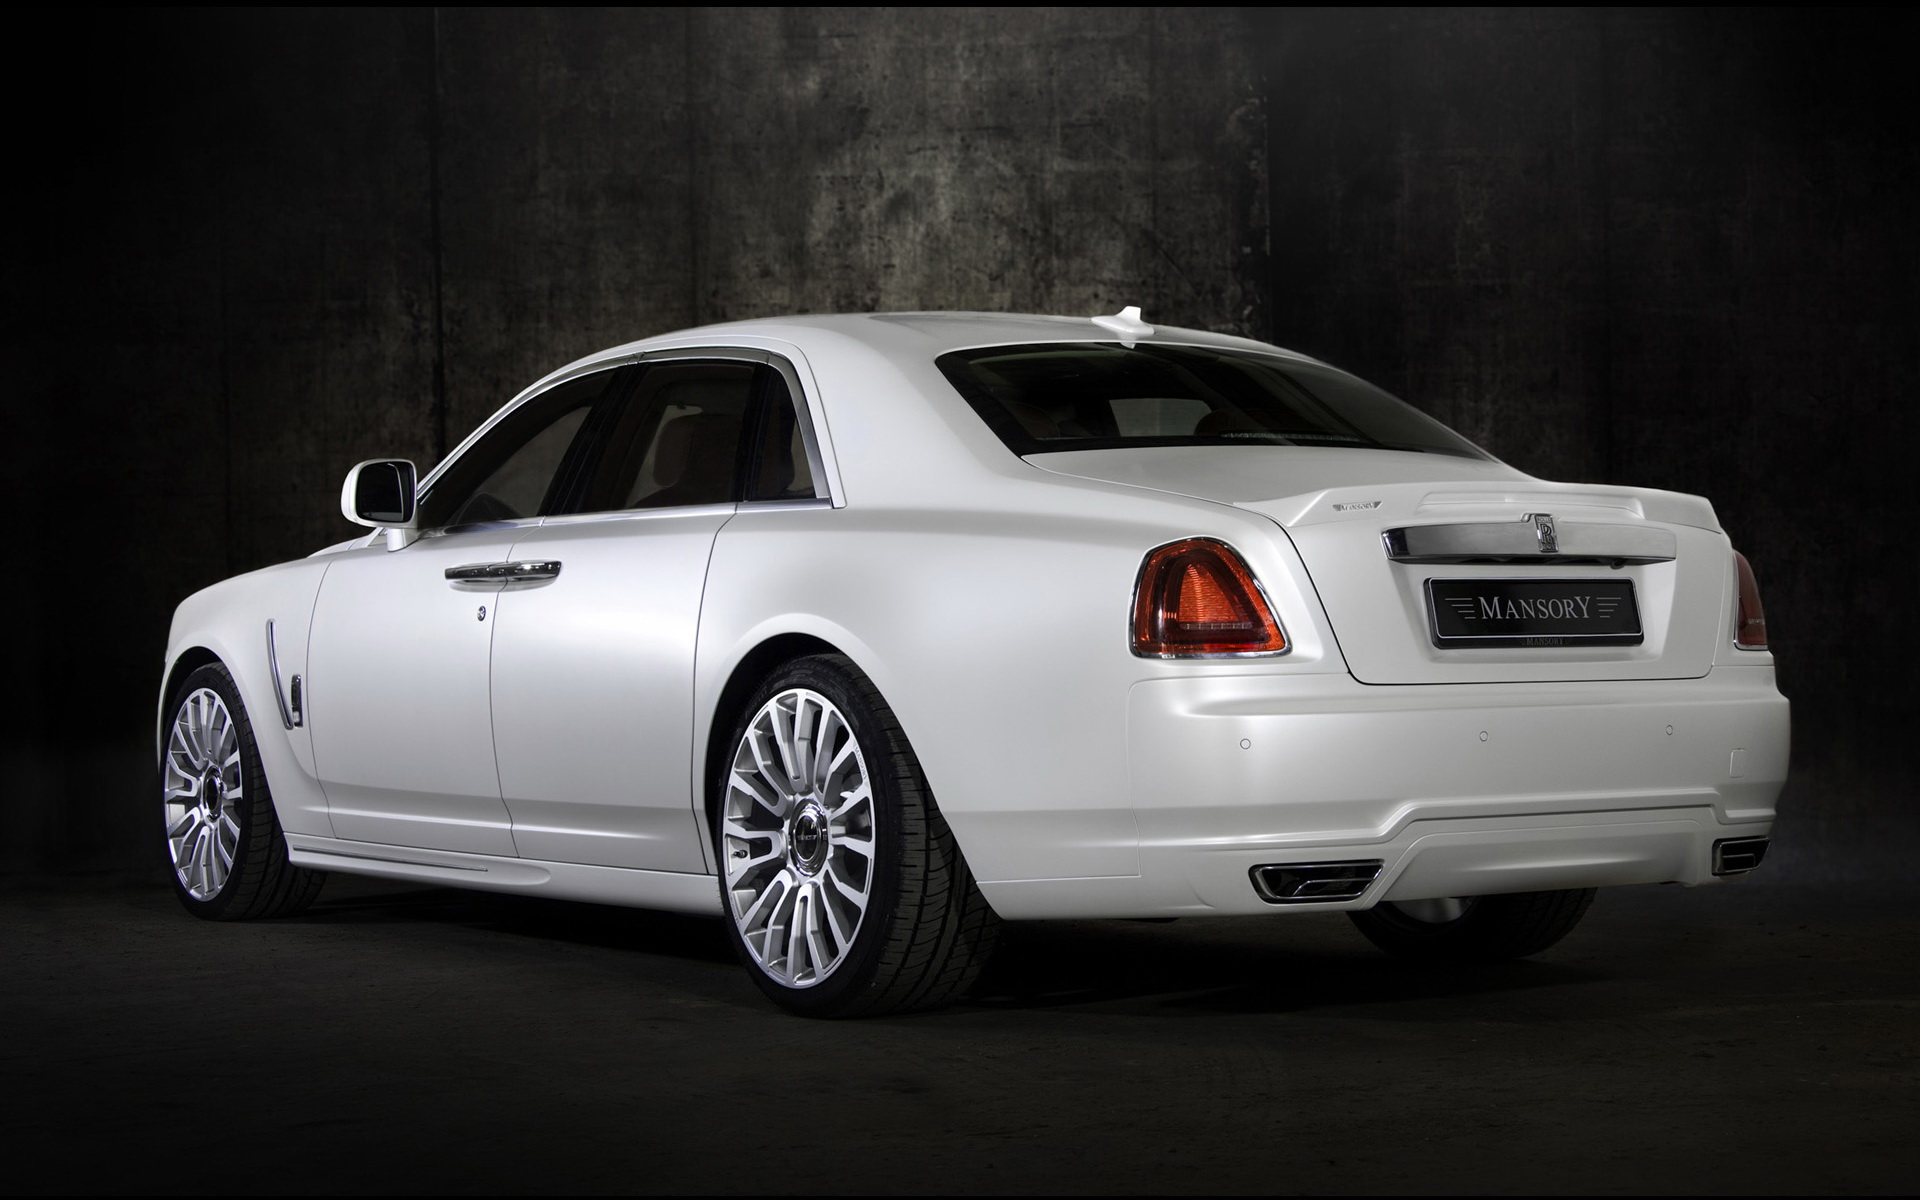 2010 Mansory Rolls-Royce(˹˹) White Ghost Limited(ֽ6)